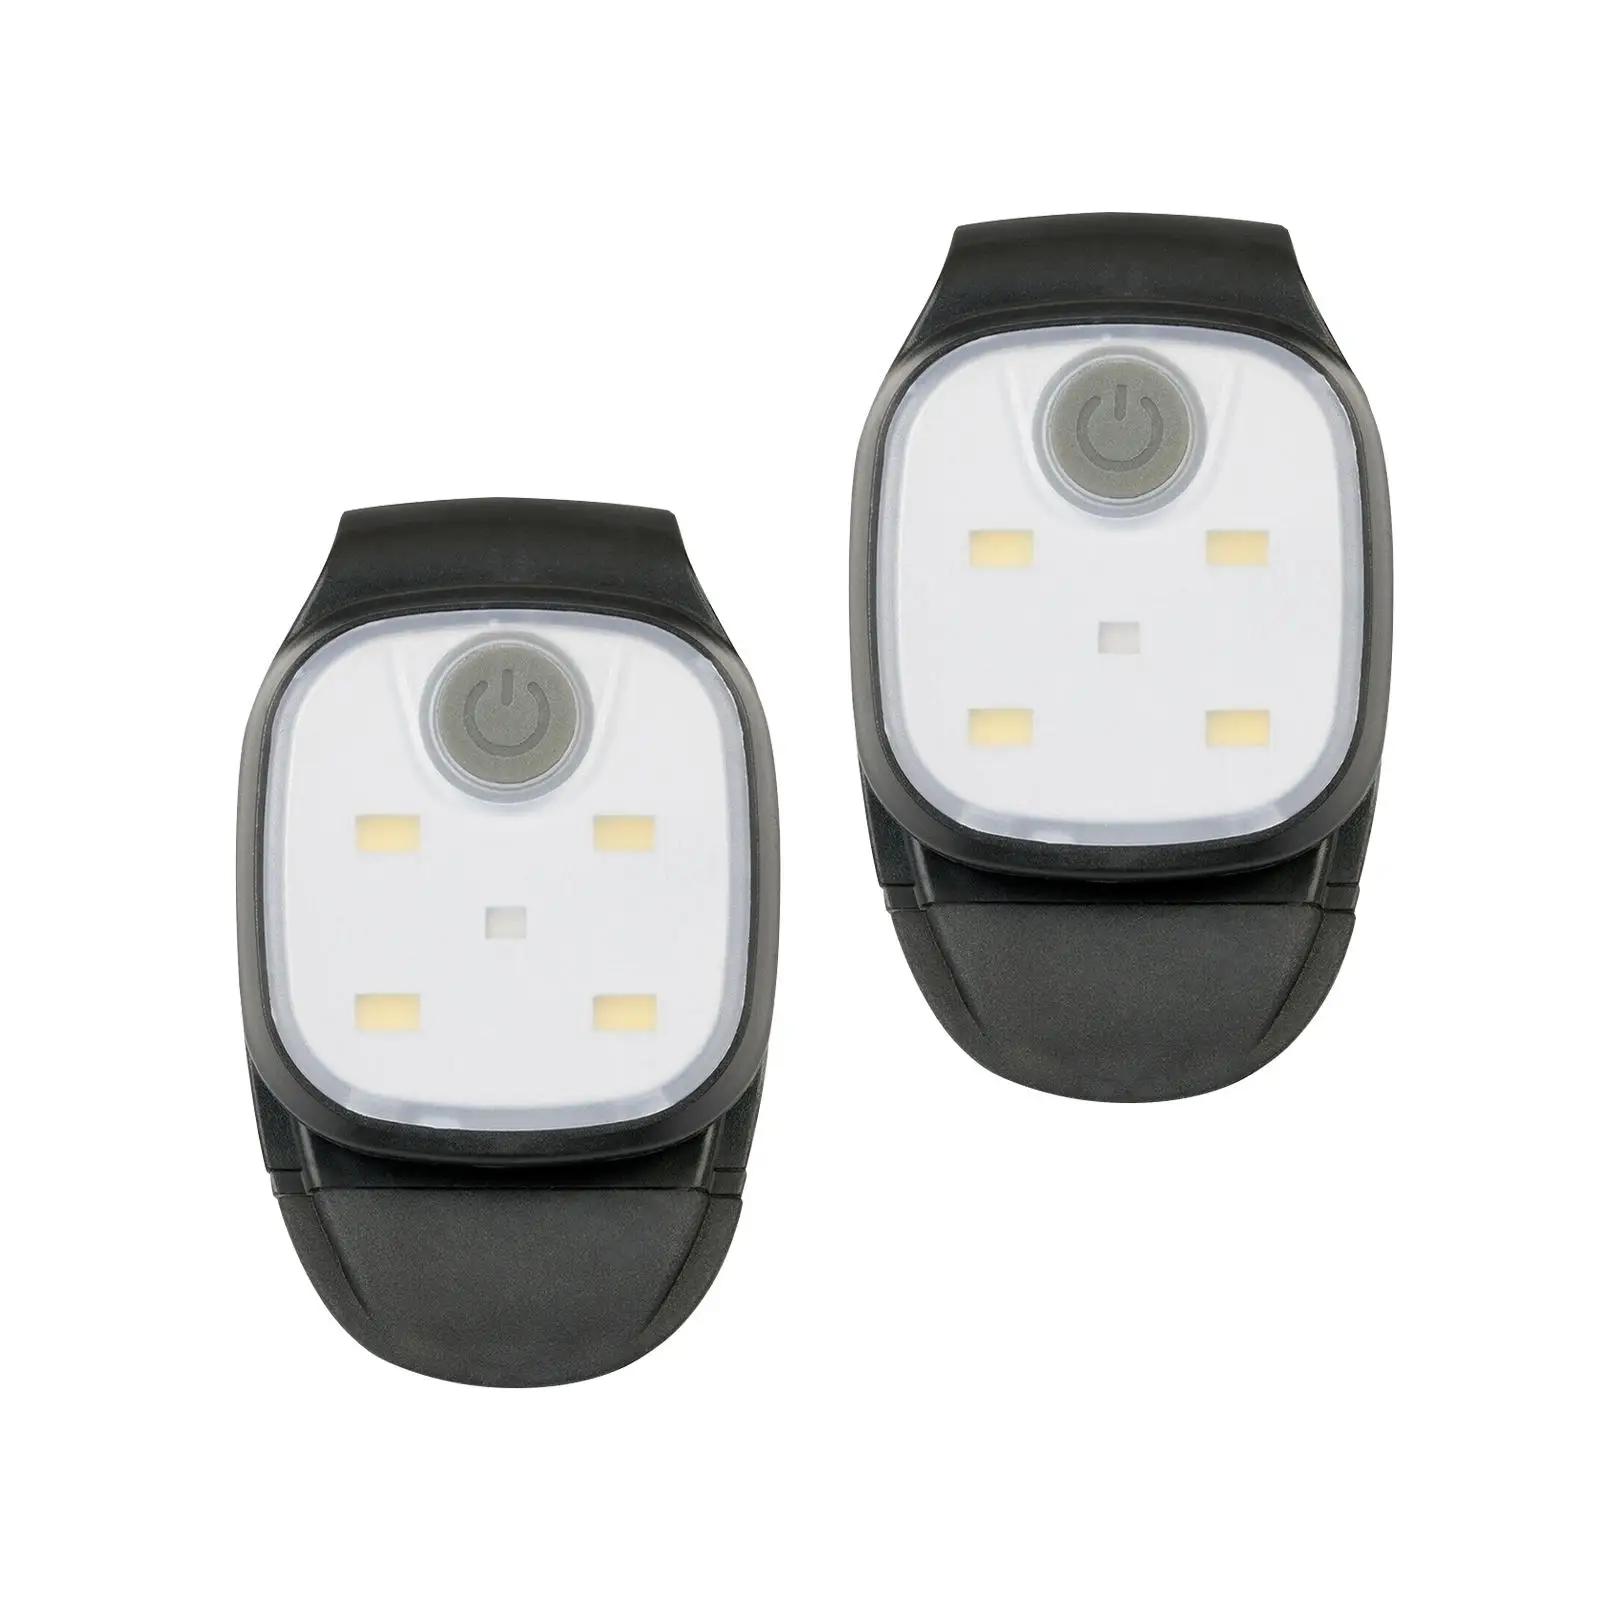 2x LED Flashing Lights 4 Flashing Modes LED Safety Light Clip On for Outdoor Sports Running Hiking Walkers Kids